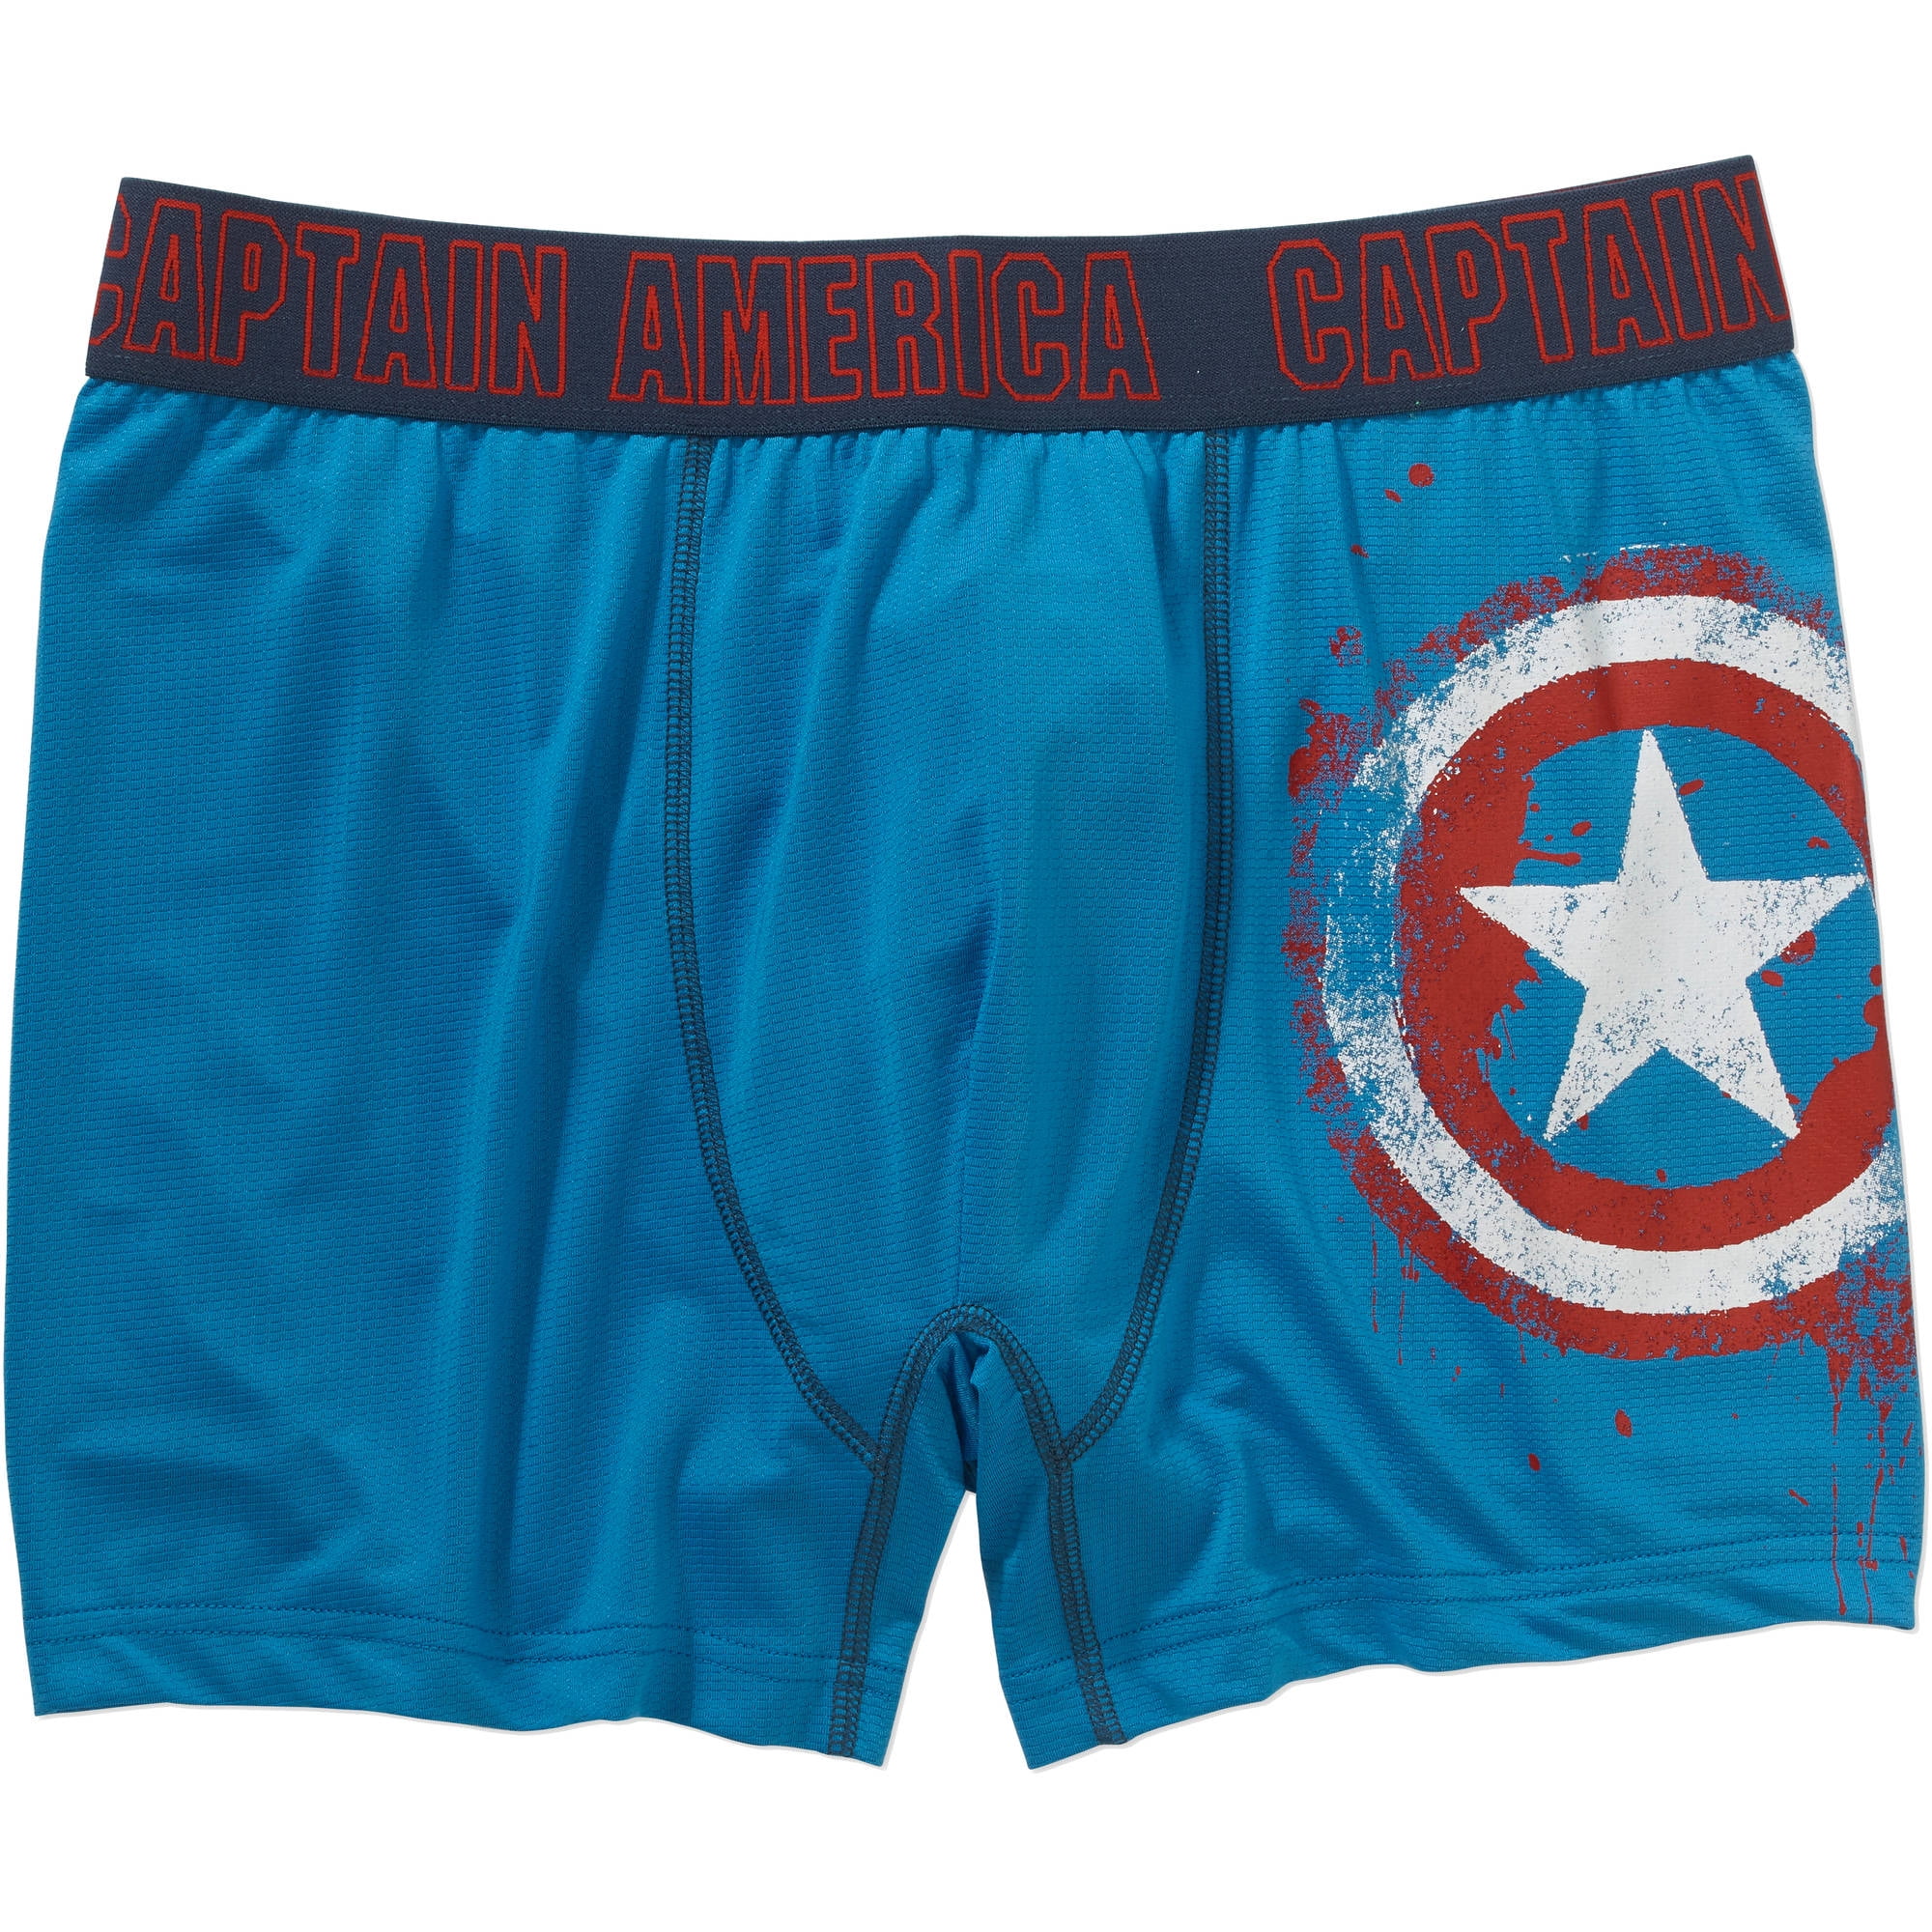 The Avengers Character Official Mens Boxers Shorts Trunks 